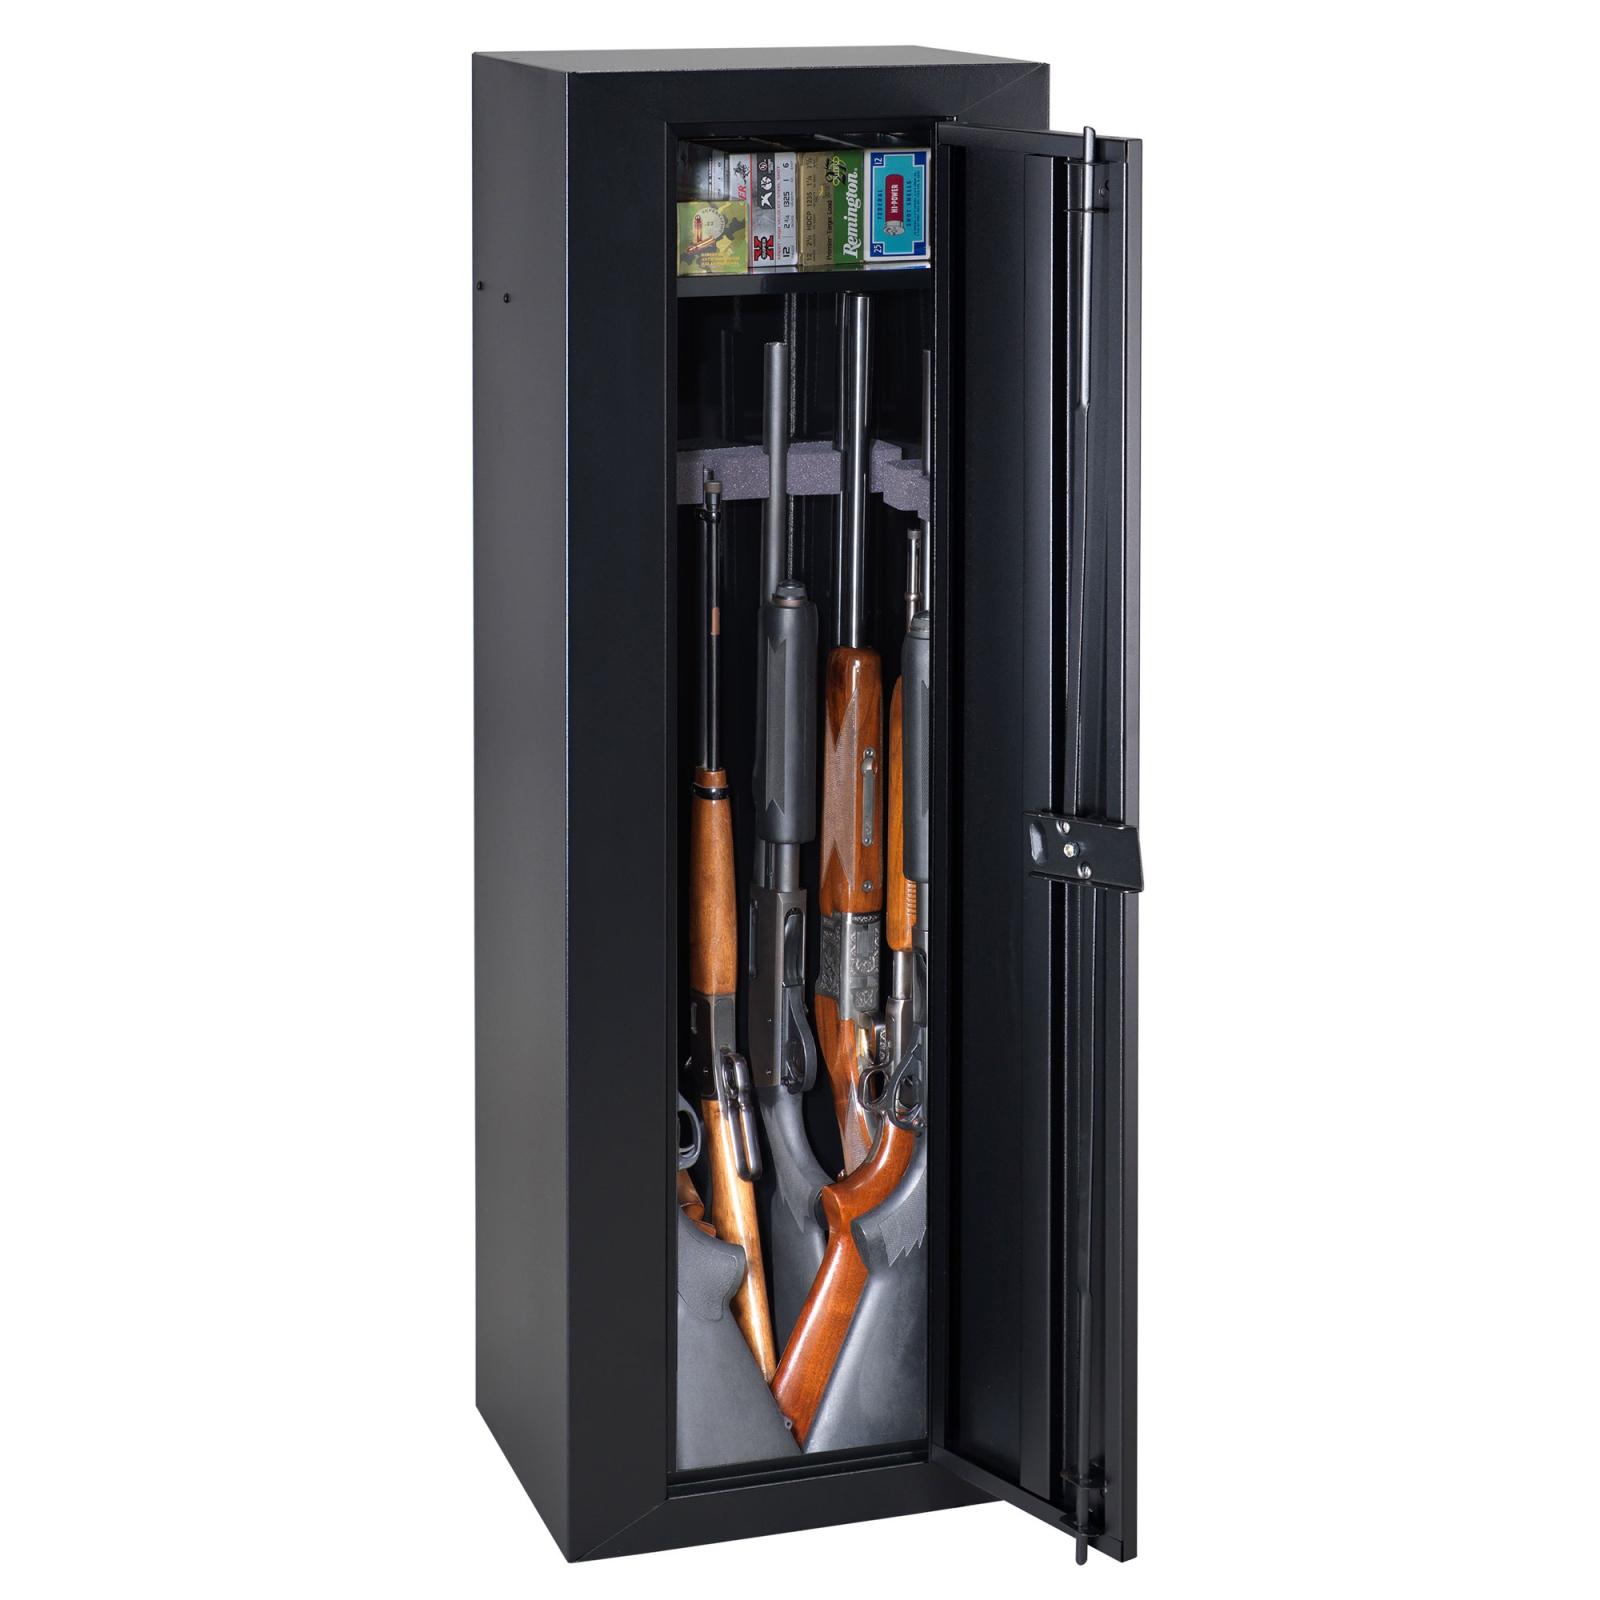 Stack-On 10 Gun Security Cabinet